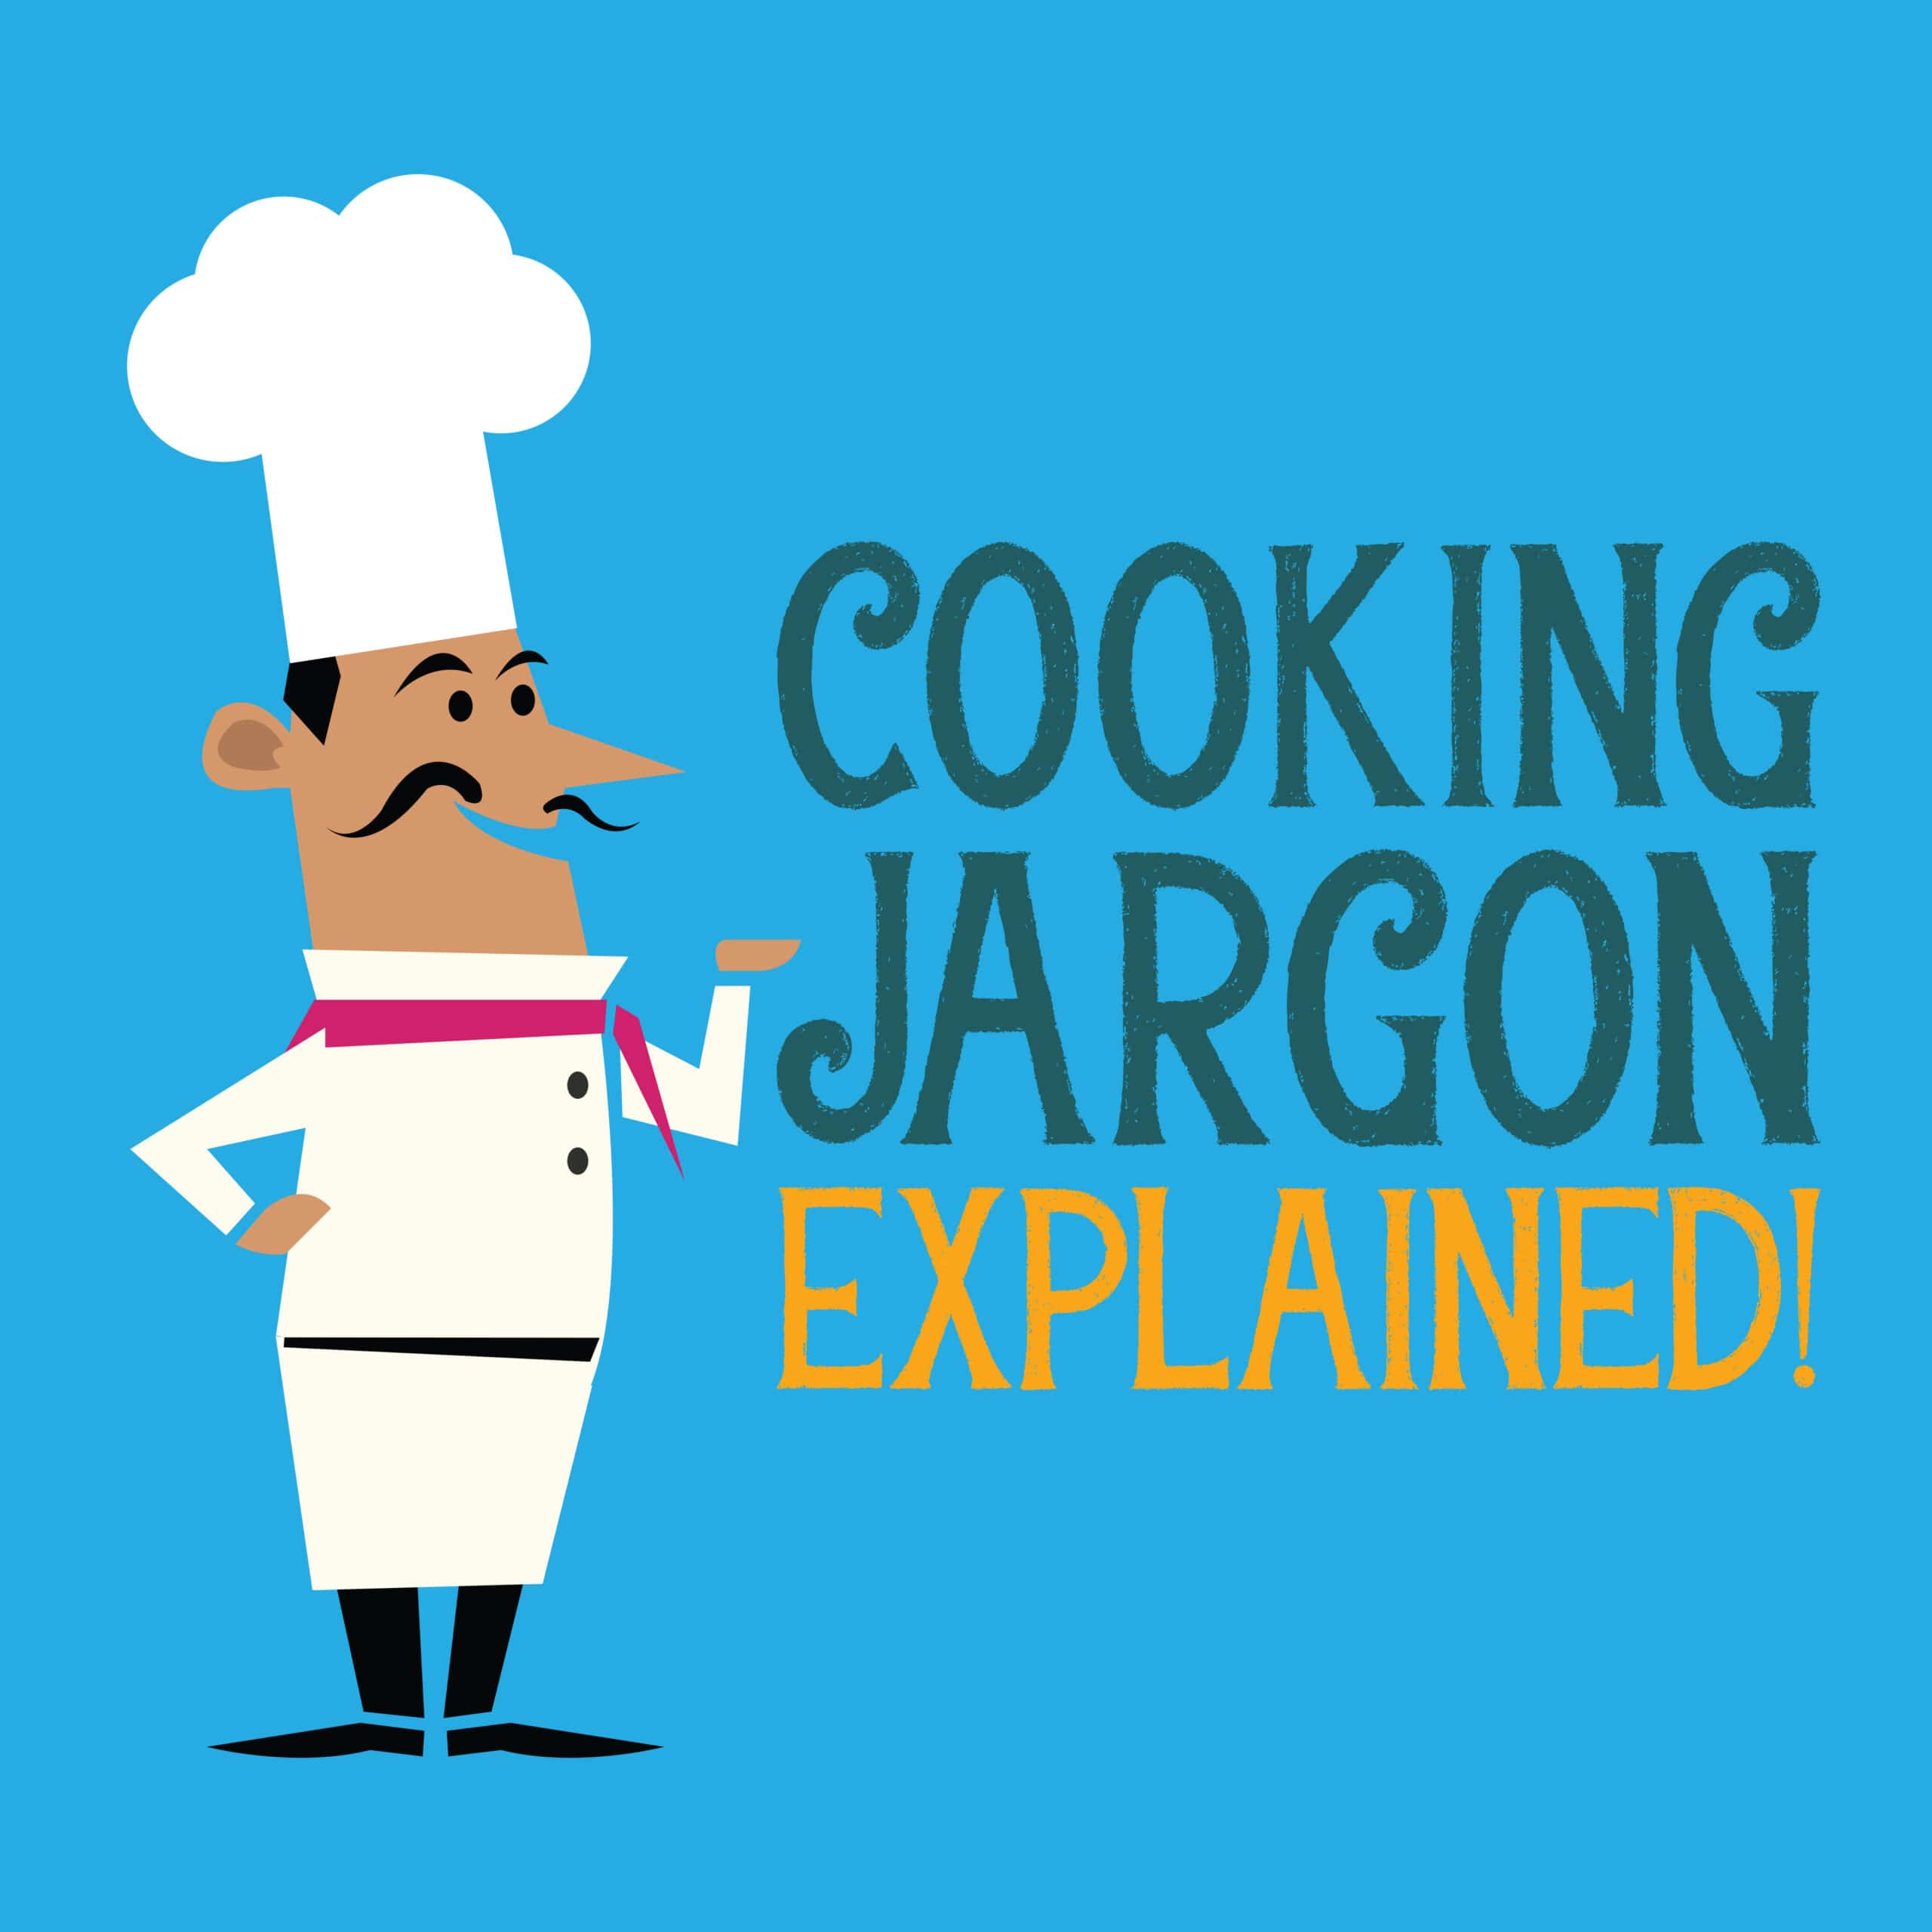 Cooking Jargon - explained! - Pureety